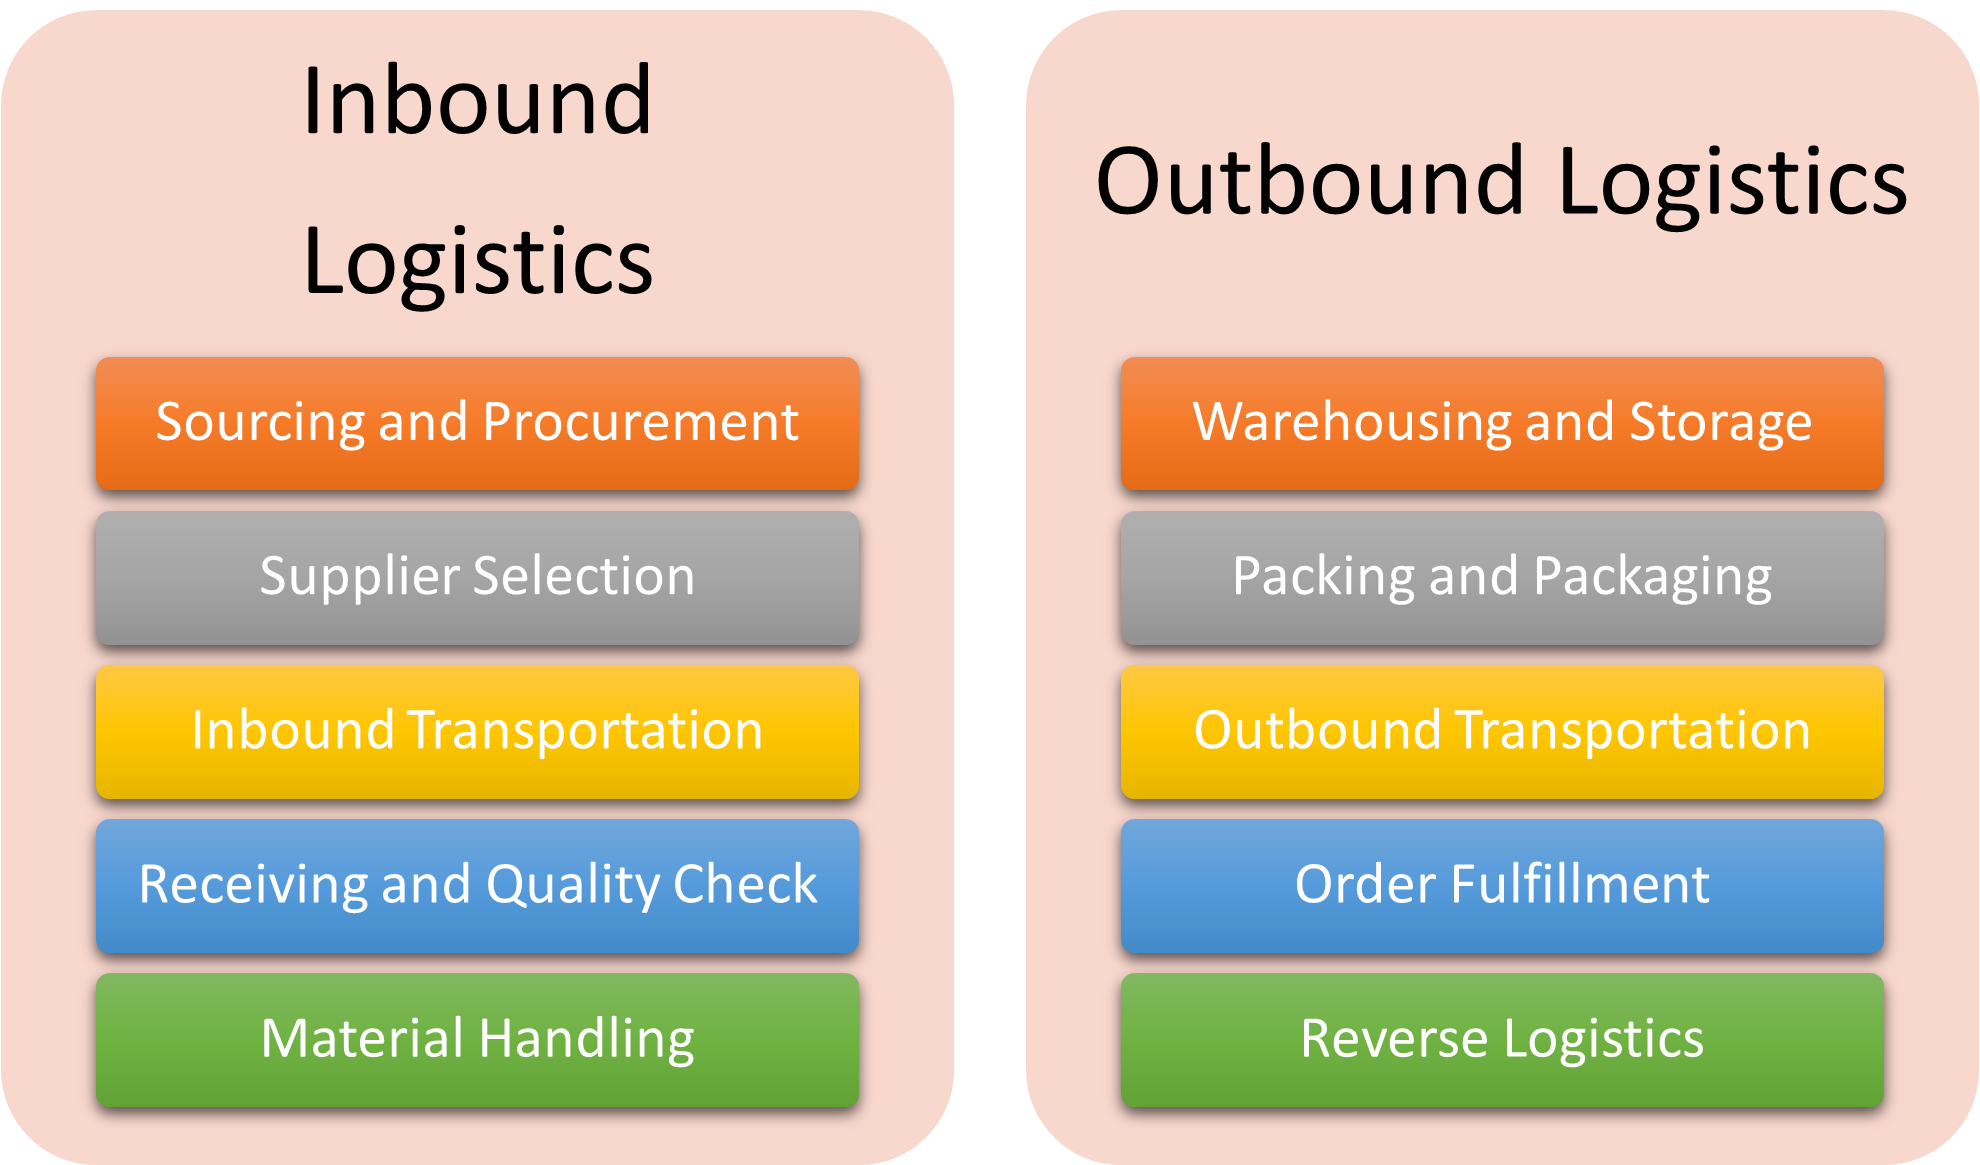 2.3 Inbound and Outbound Logistics Global Value Chain